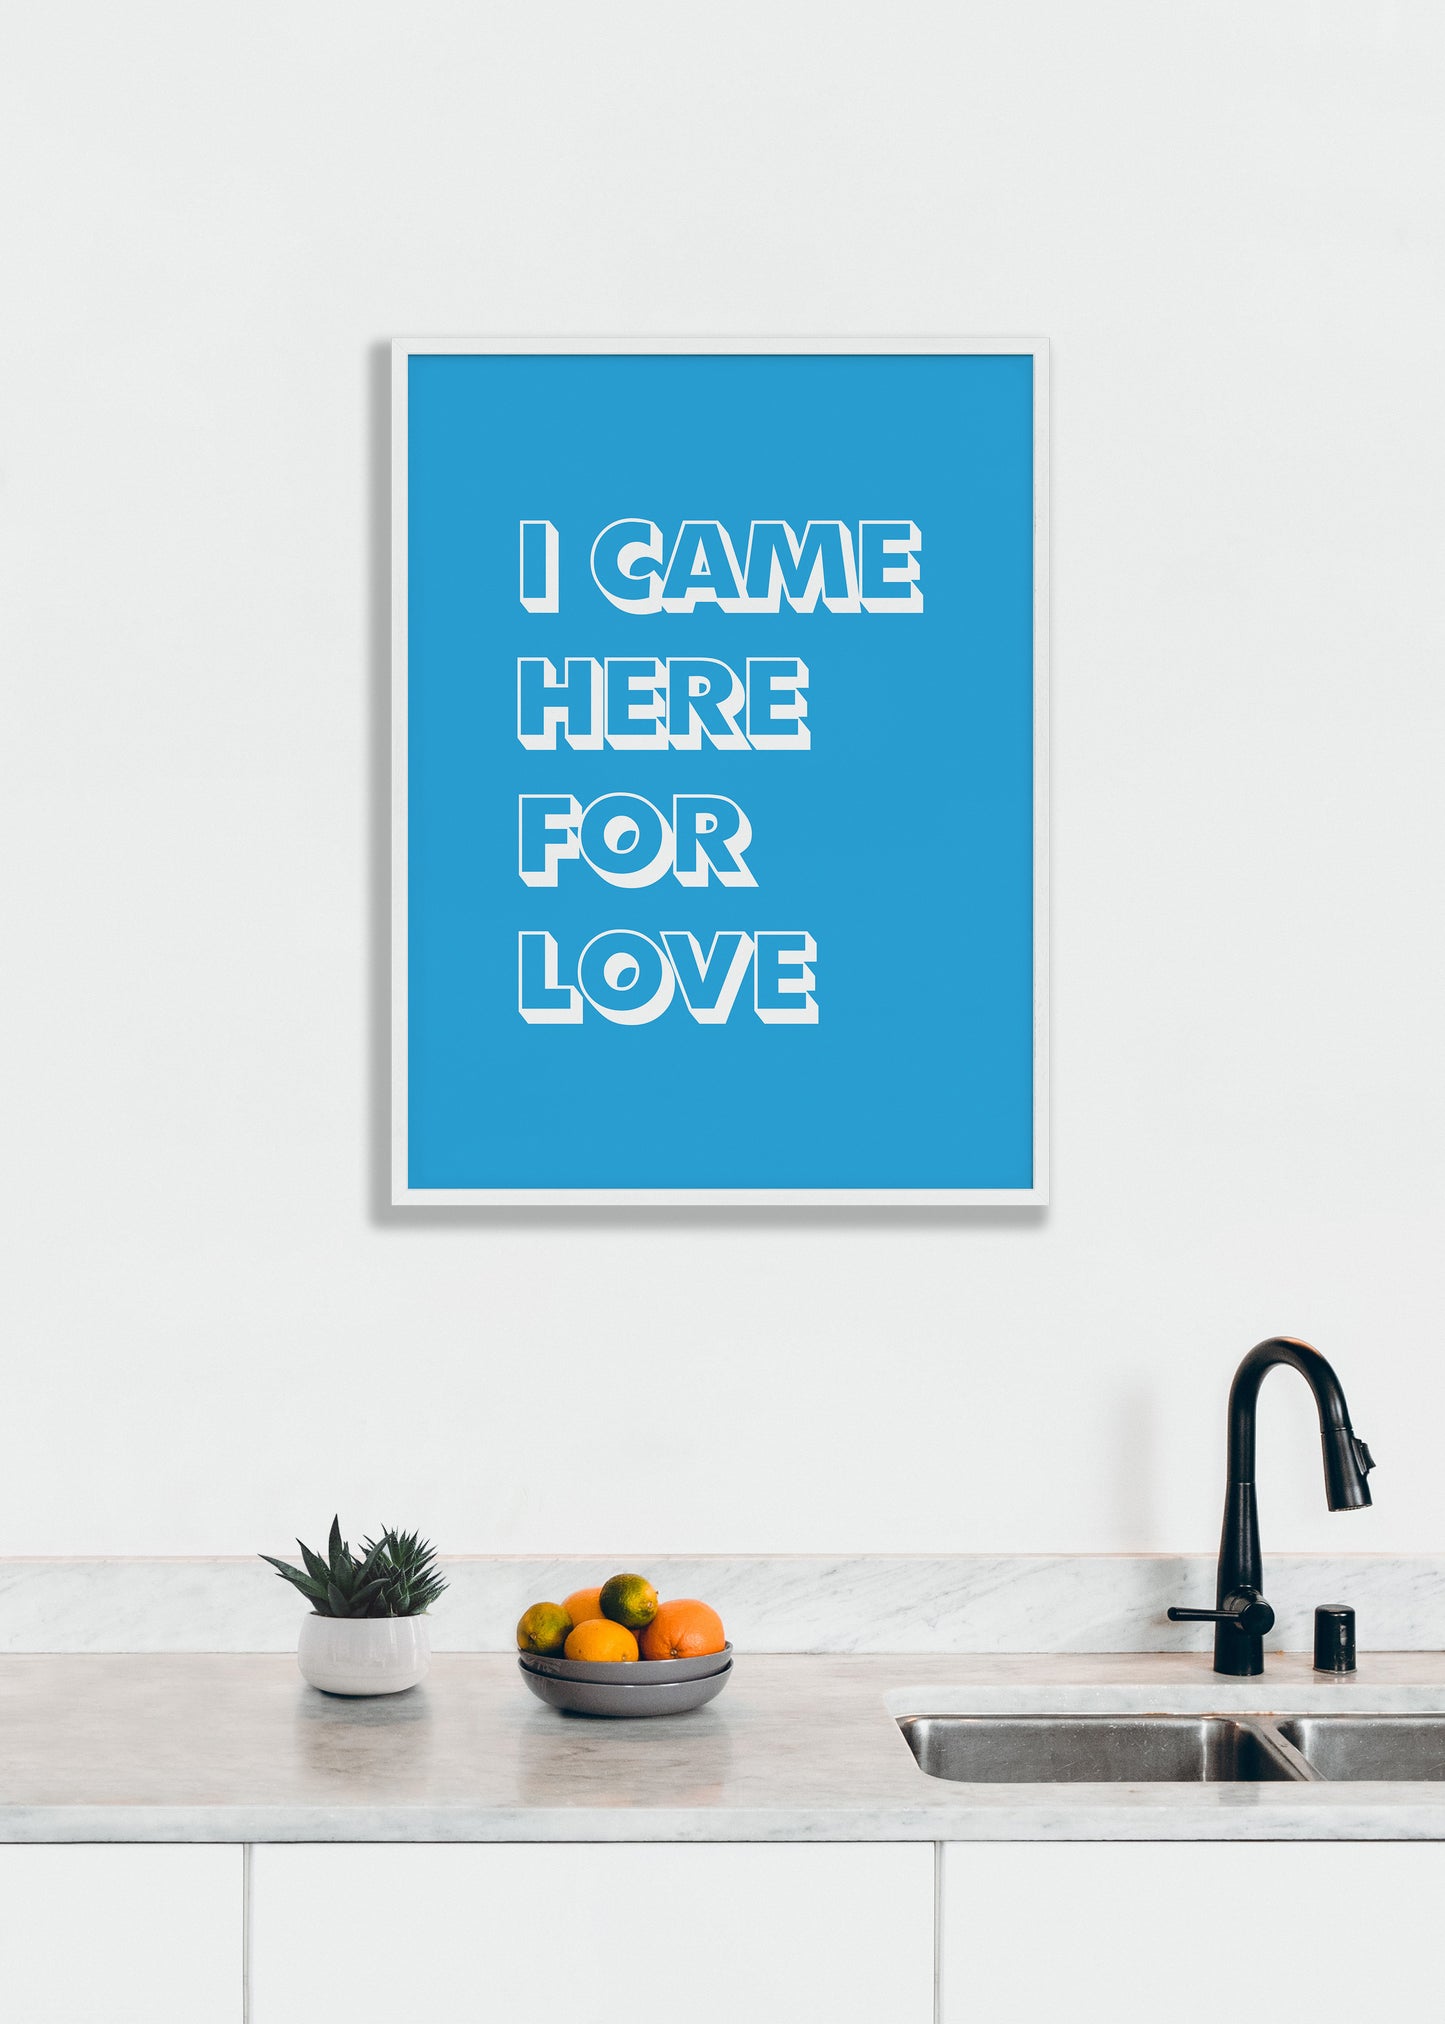 I Came Here For Love Pop Print